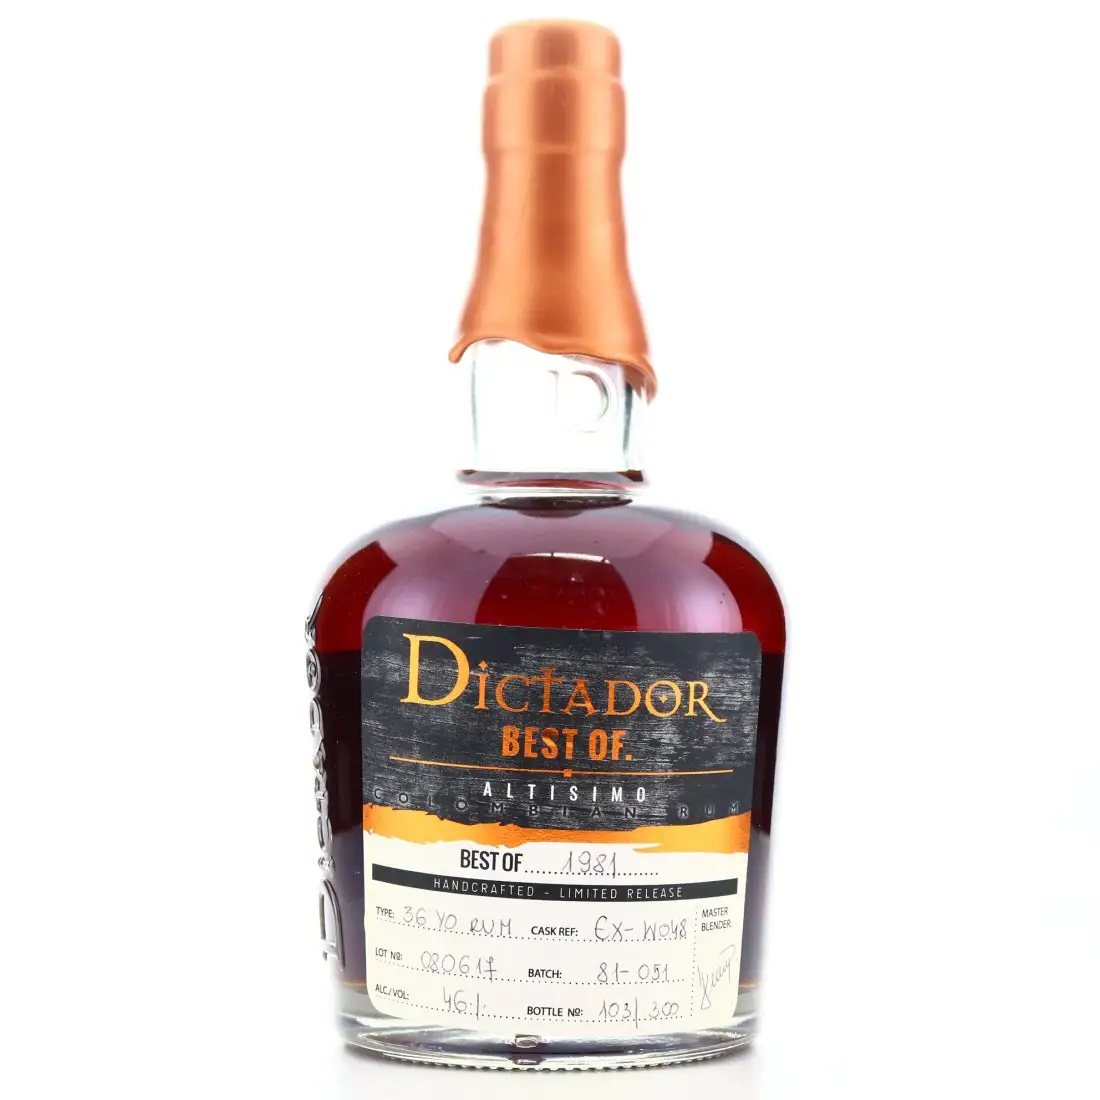 Image of the front of the bottle of the rum Dictador Best Of